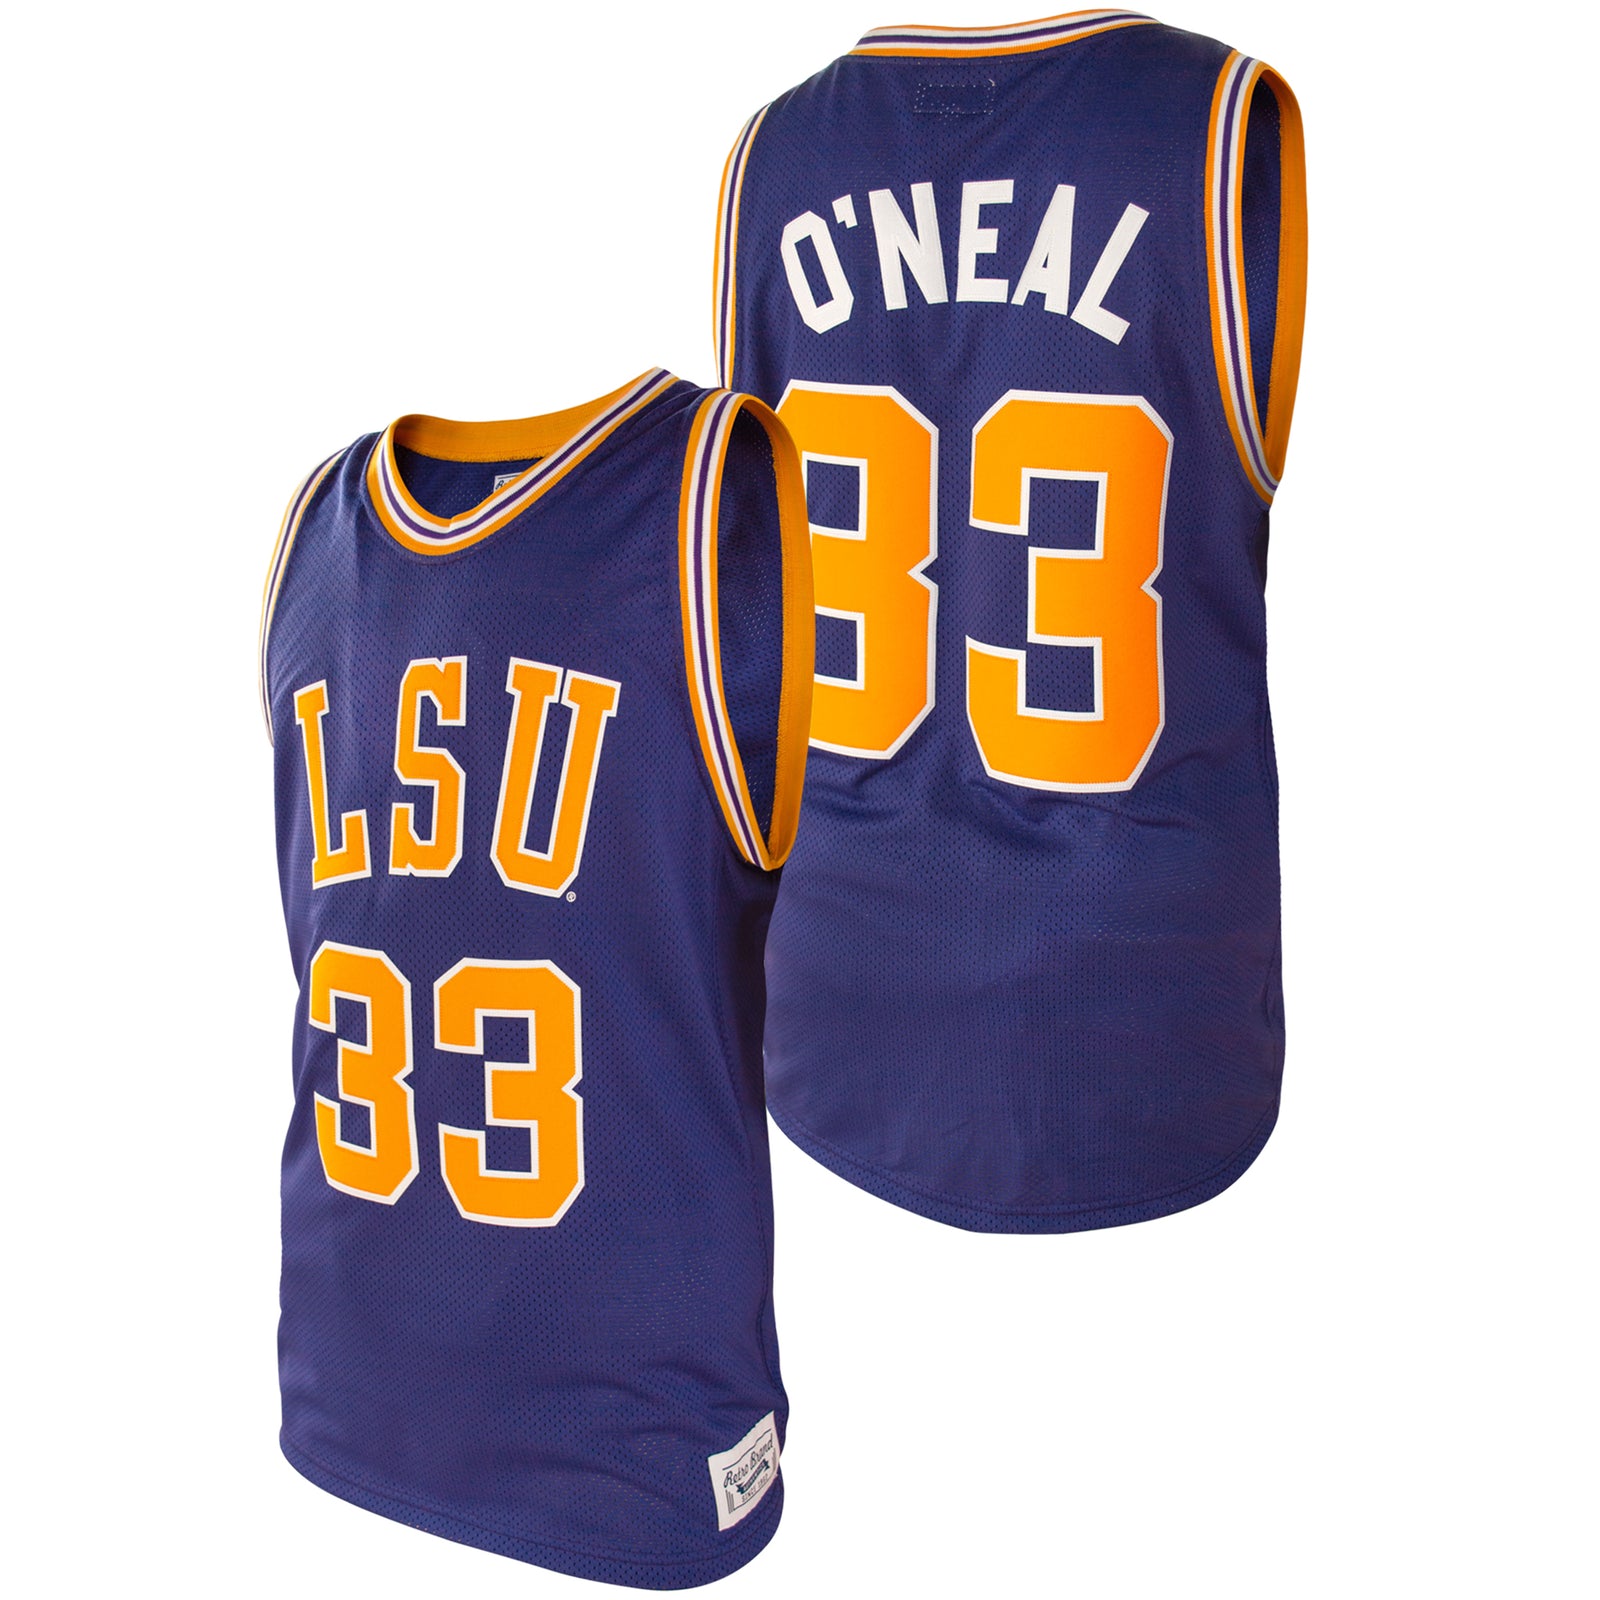 LSU Tigers Shaquille O'Neal Throwback Jersey